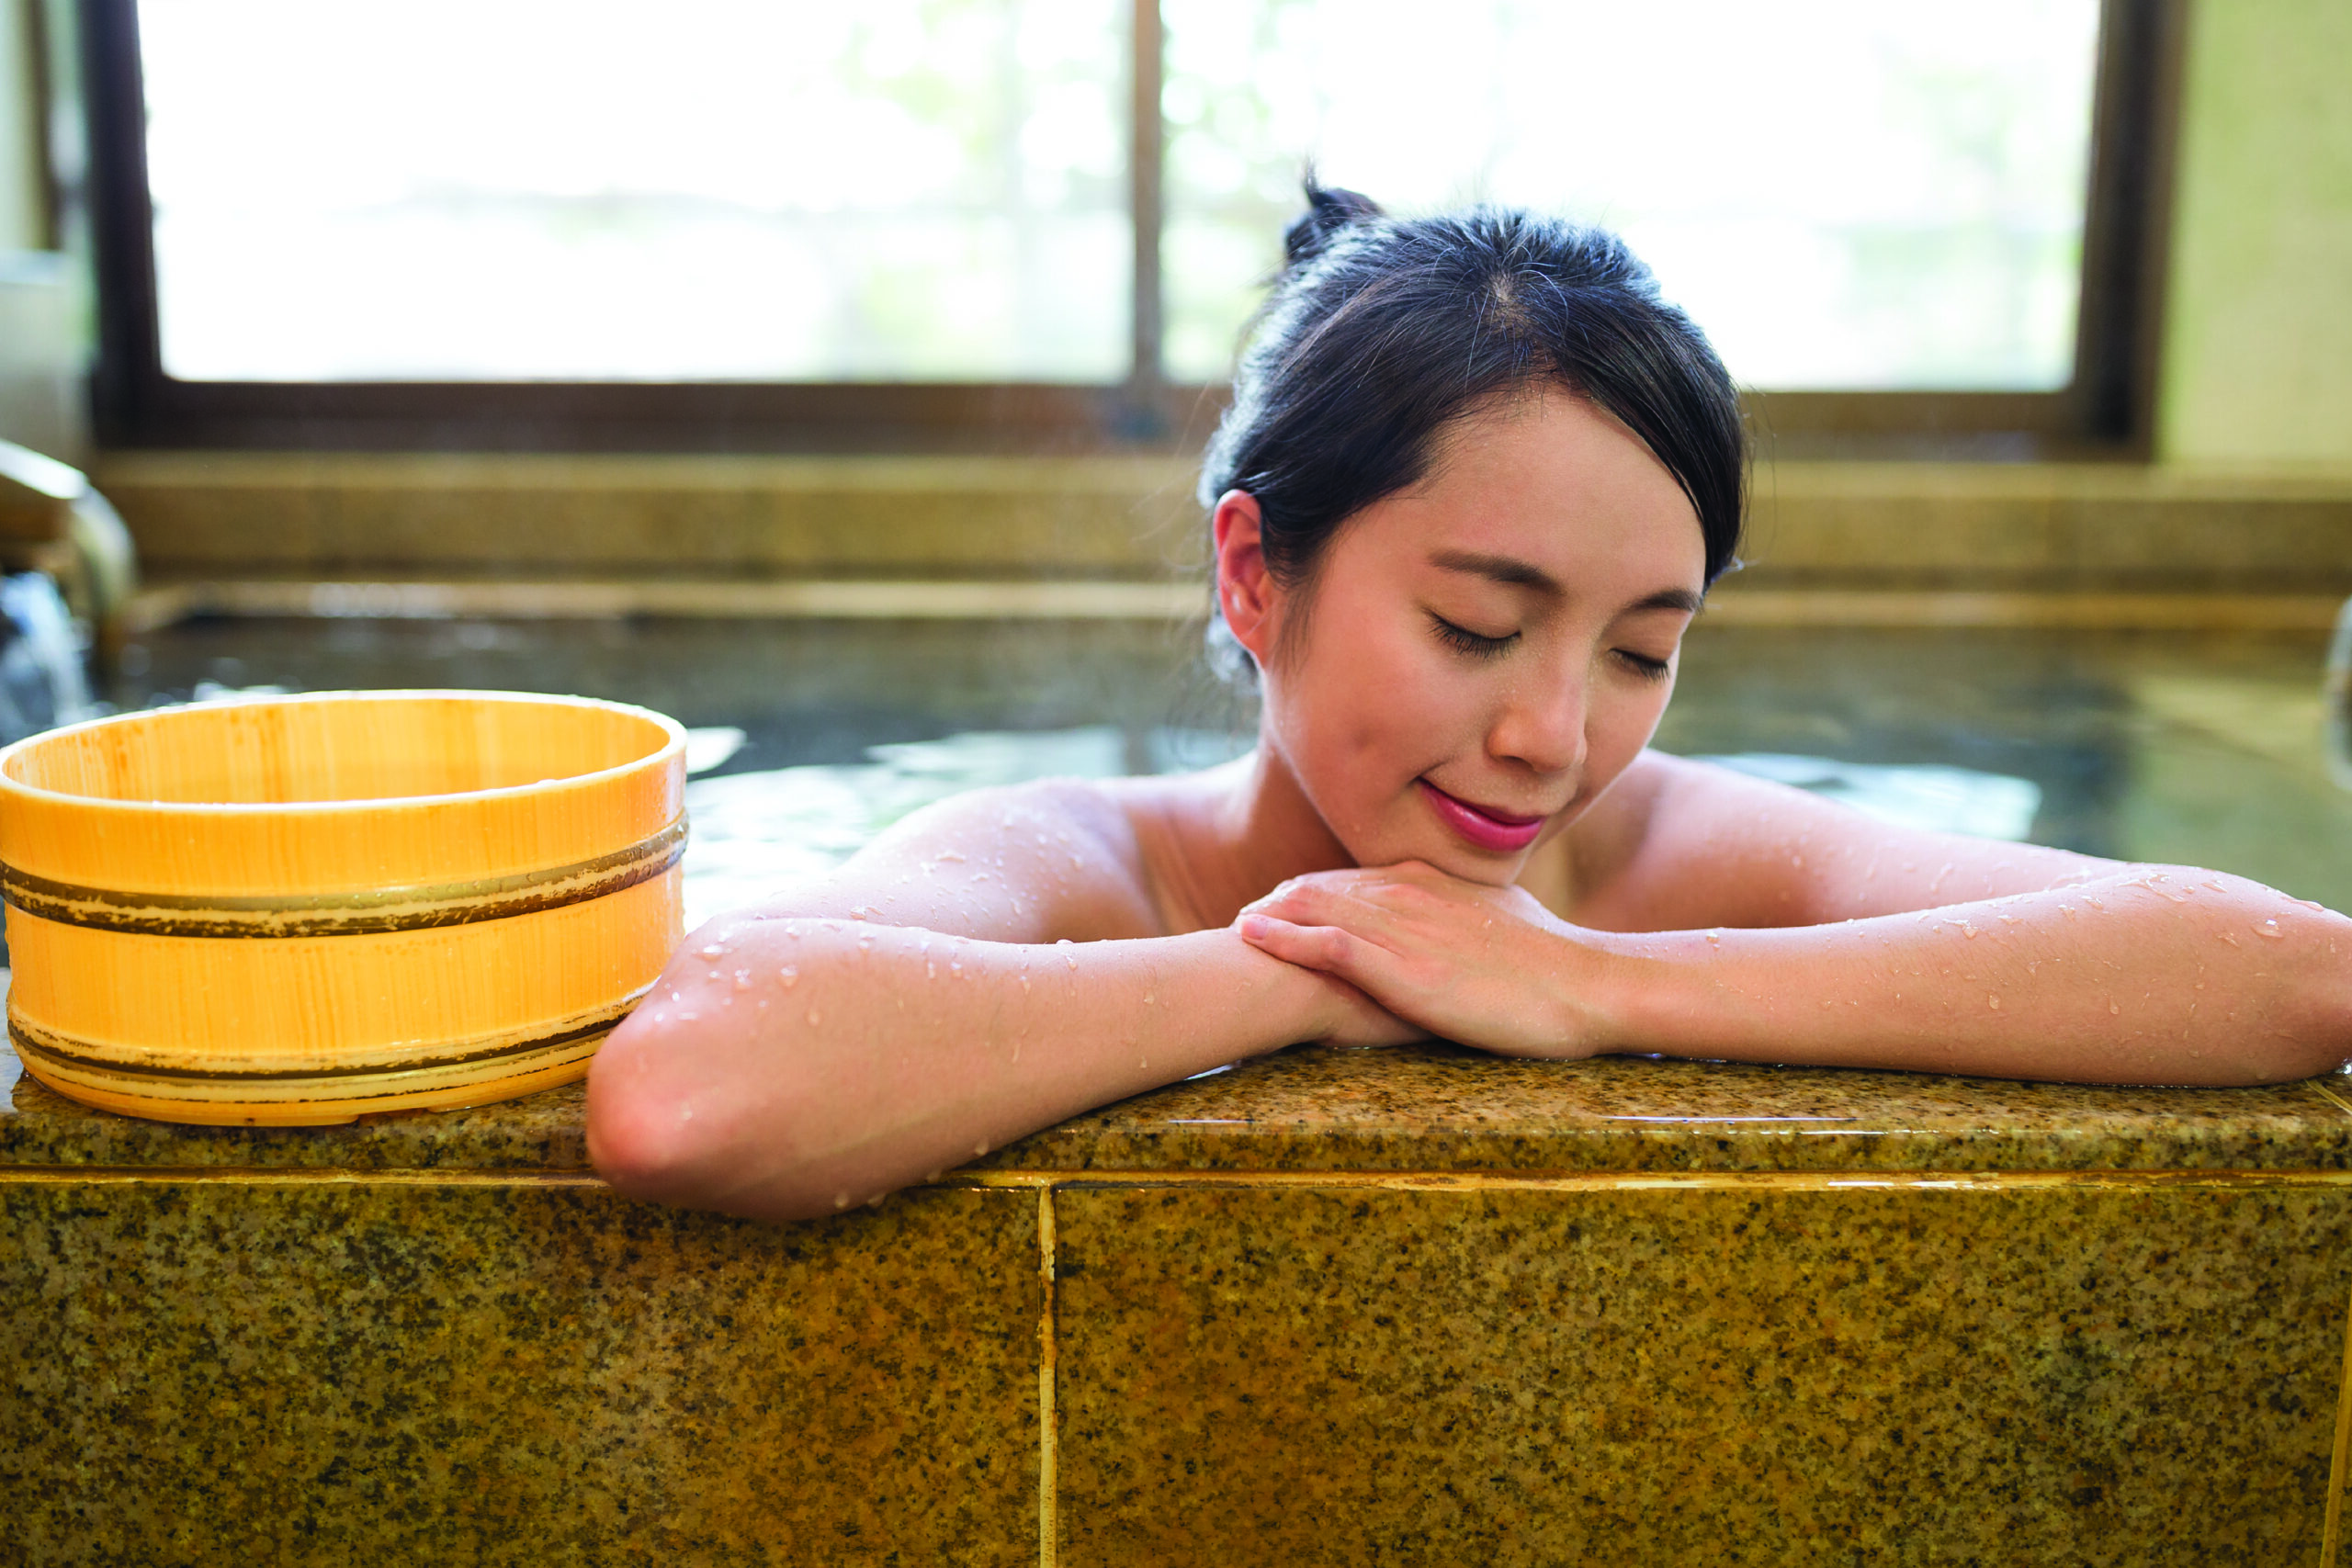 The Process of Soaking in An Onsen